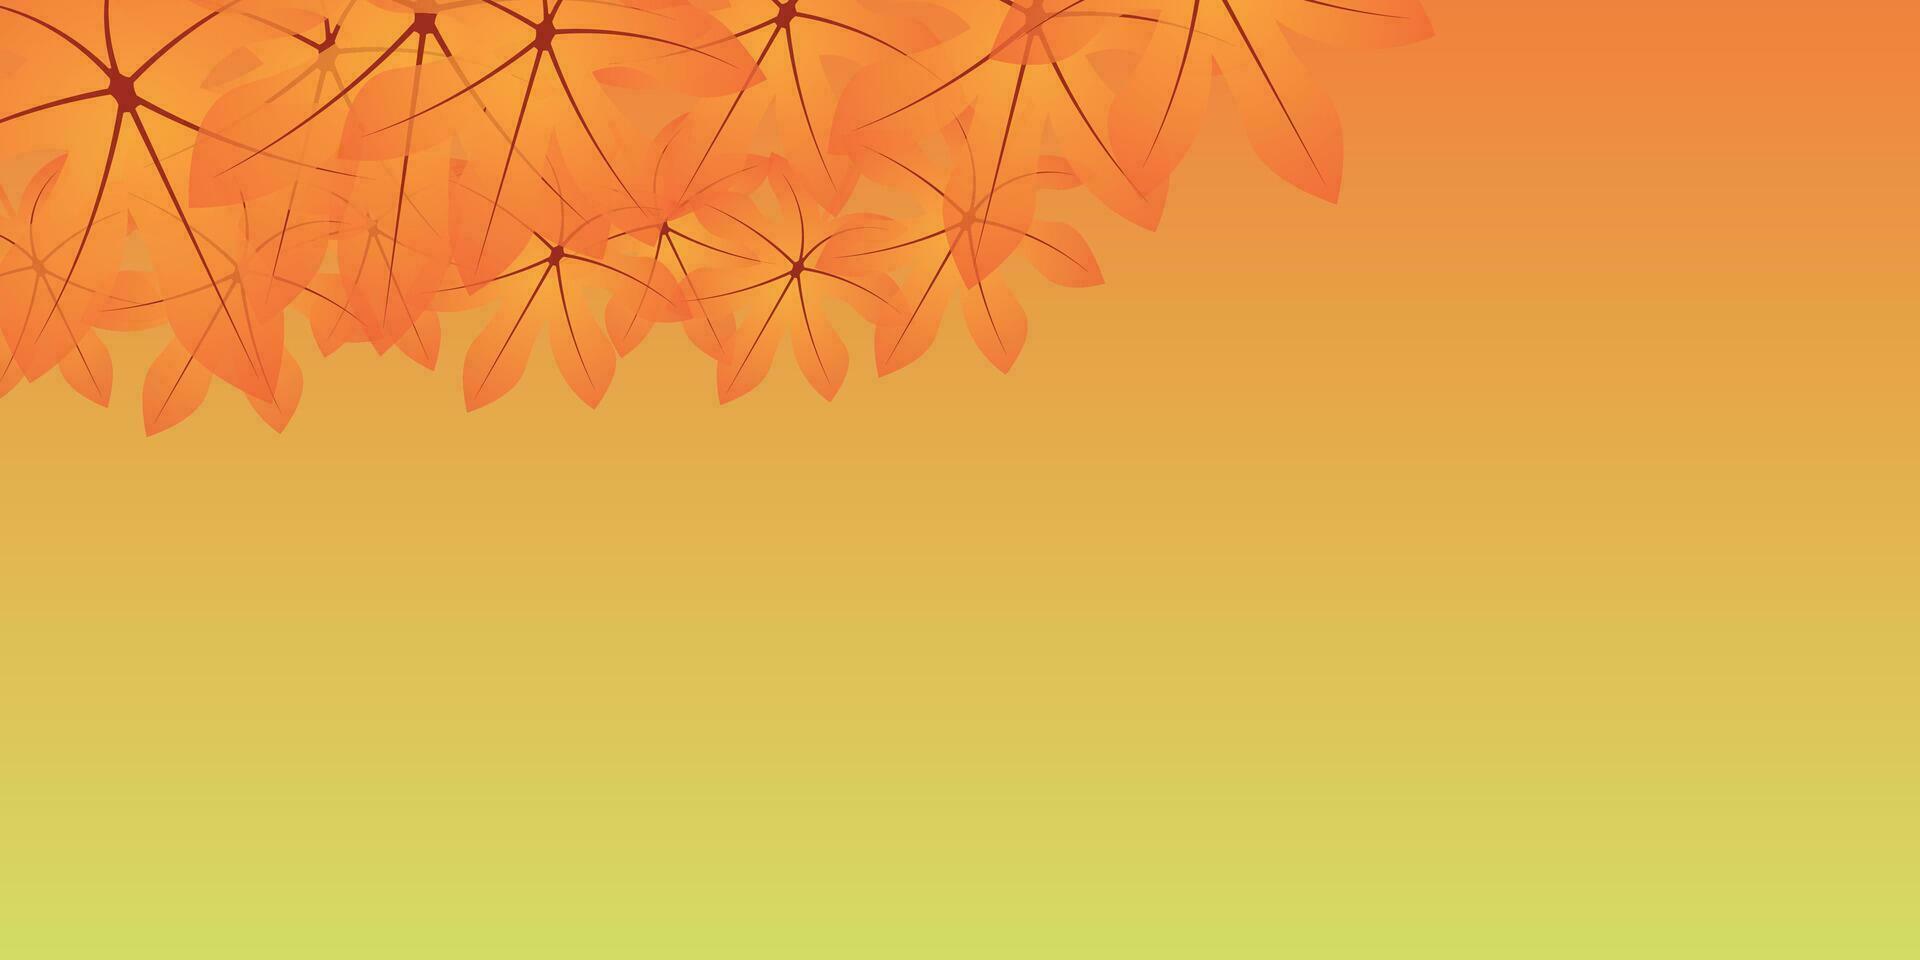 Abstract background design with autumn theme. vector